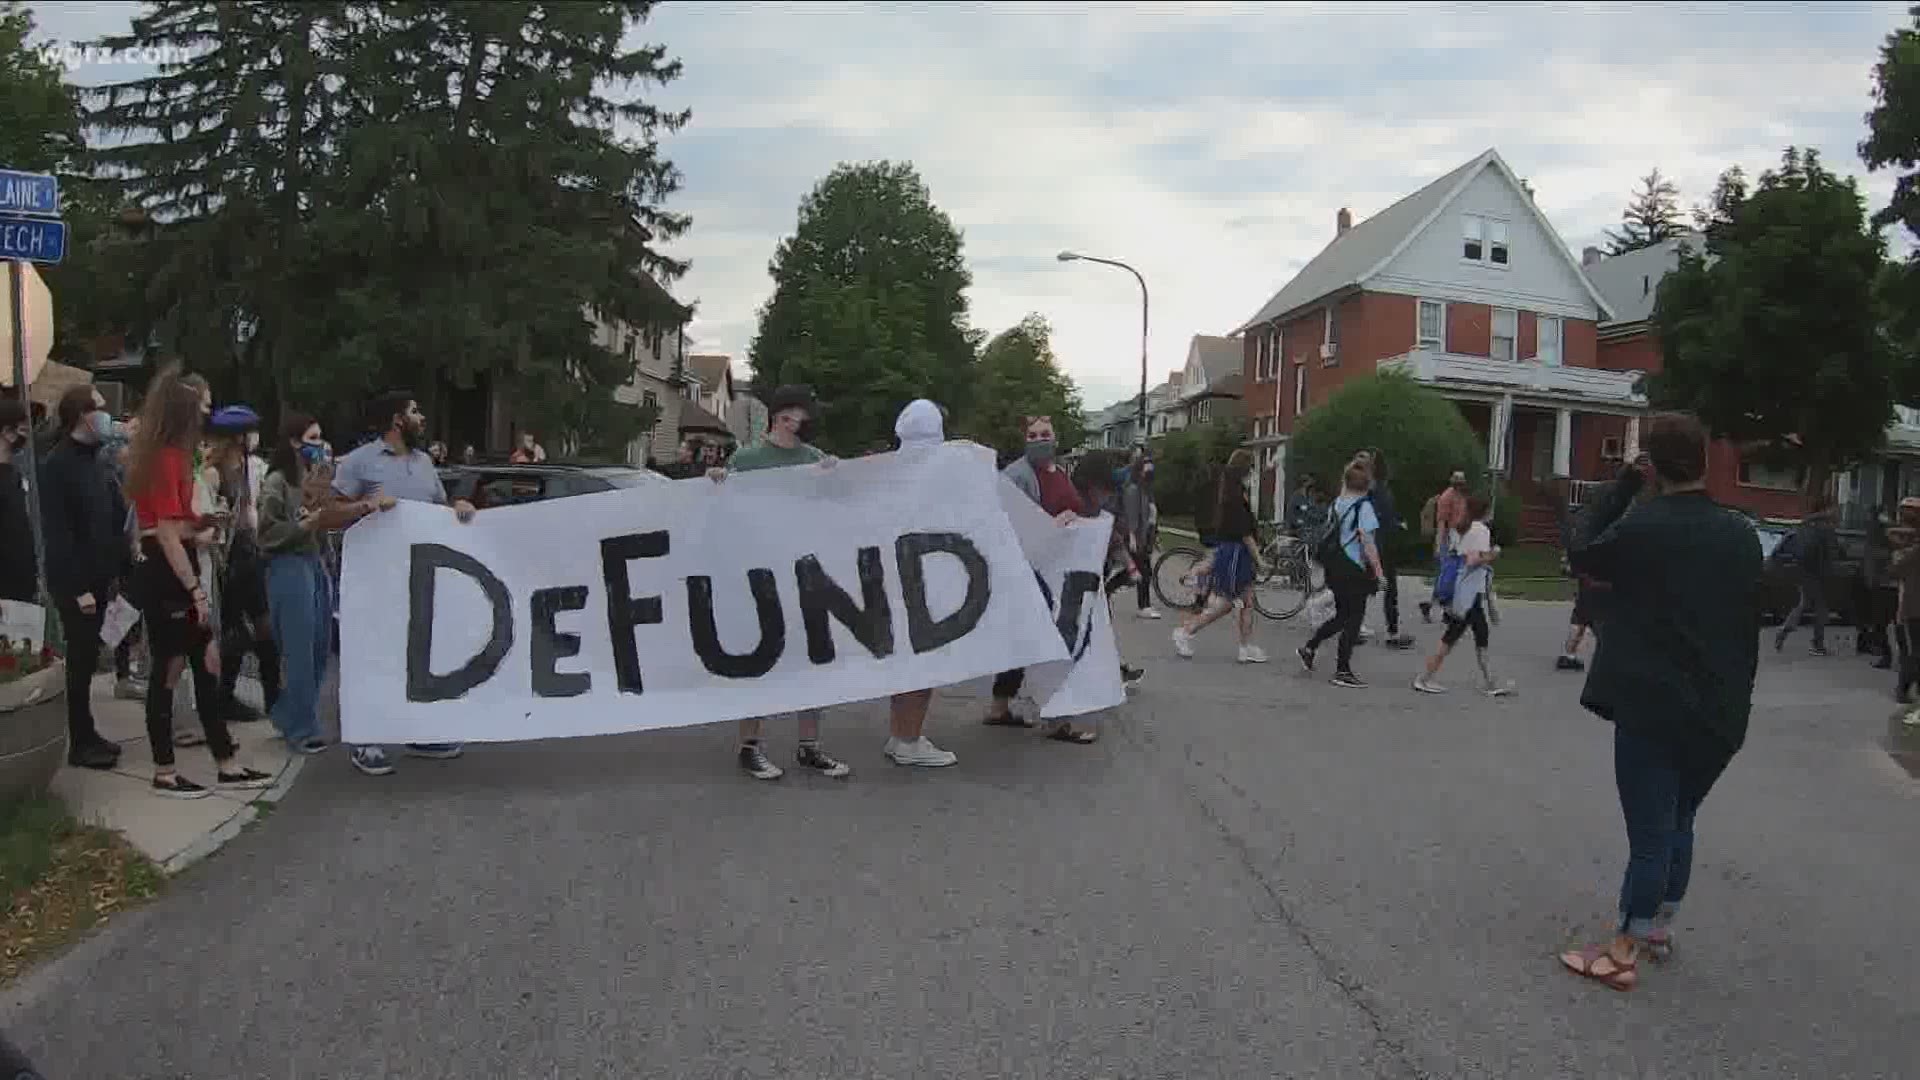 A group of protesters marching through the city of Buffalo on Wednesday night reached Mayor Byron Brown's house when police escorted the mayor away from the scene.